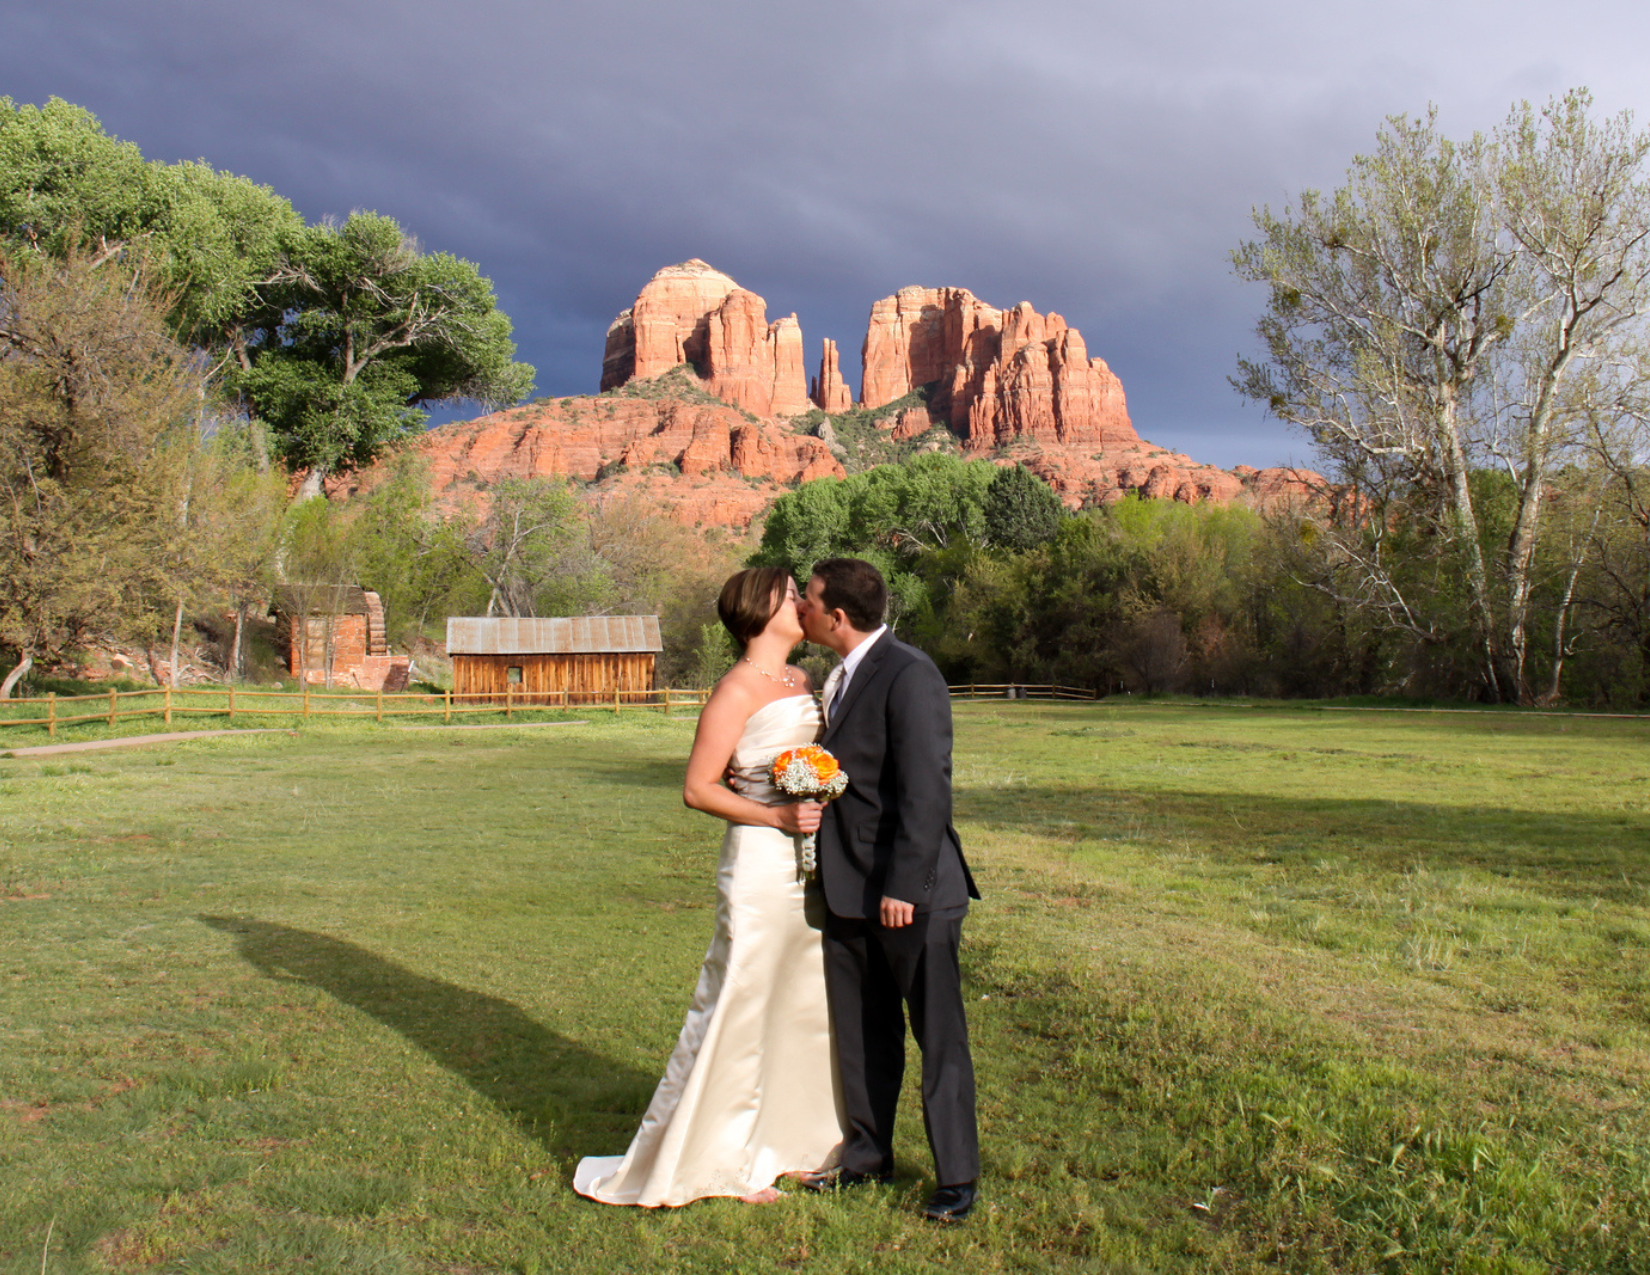 A newly wed couple and their first kiss after being married in front of Cathedral Rock in Sedona, Arizona